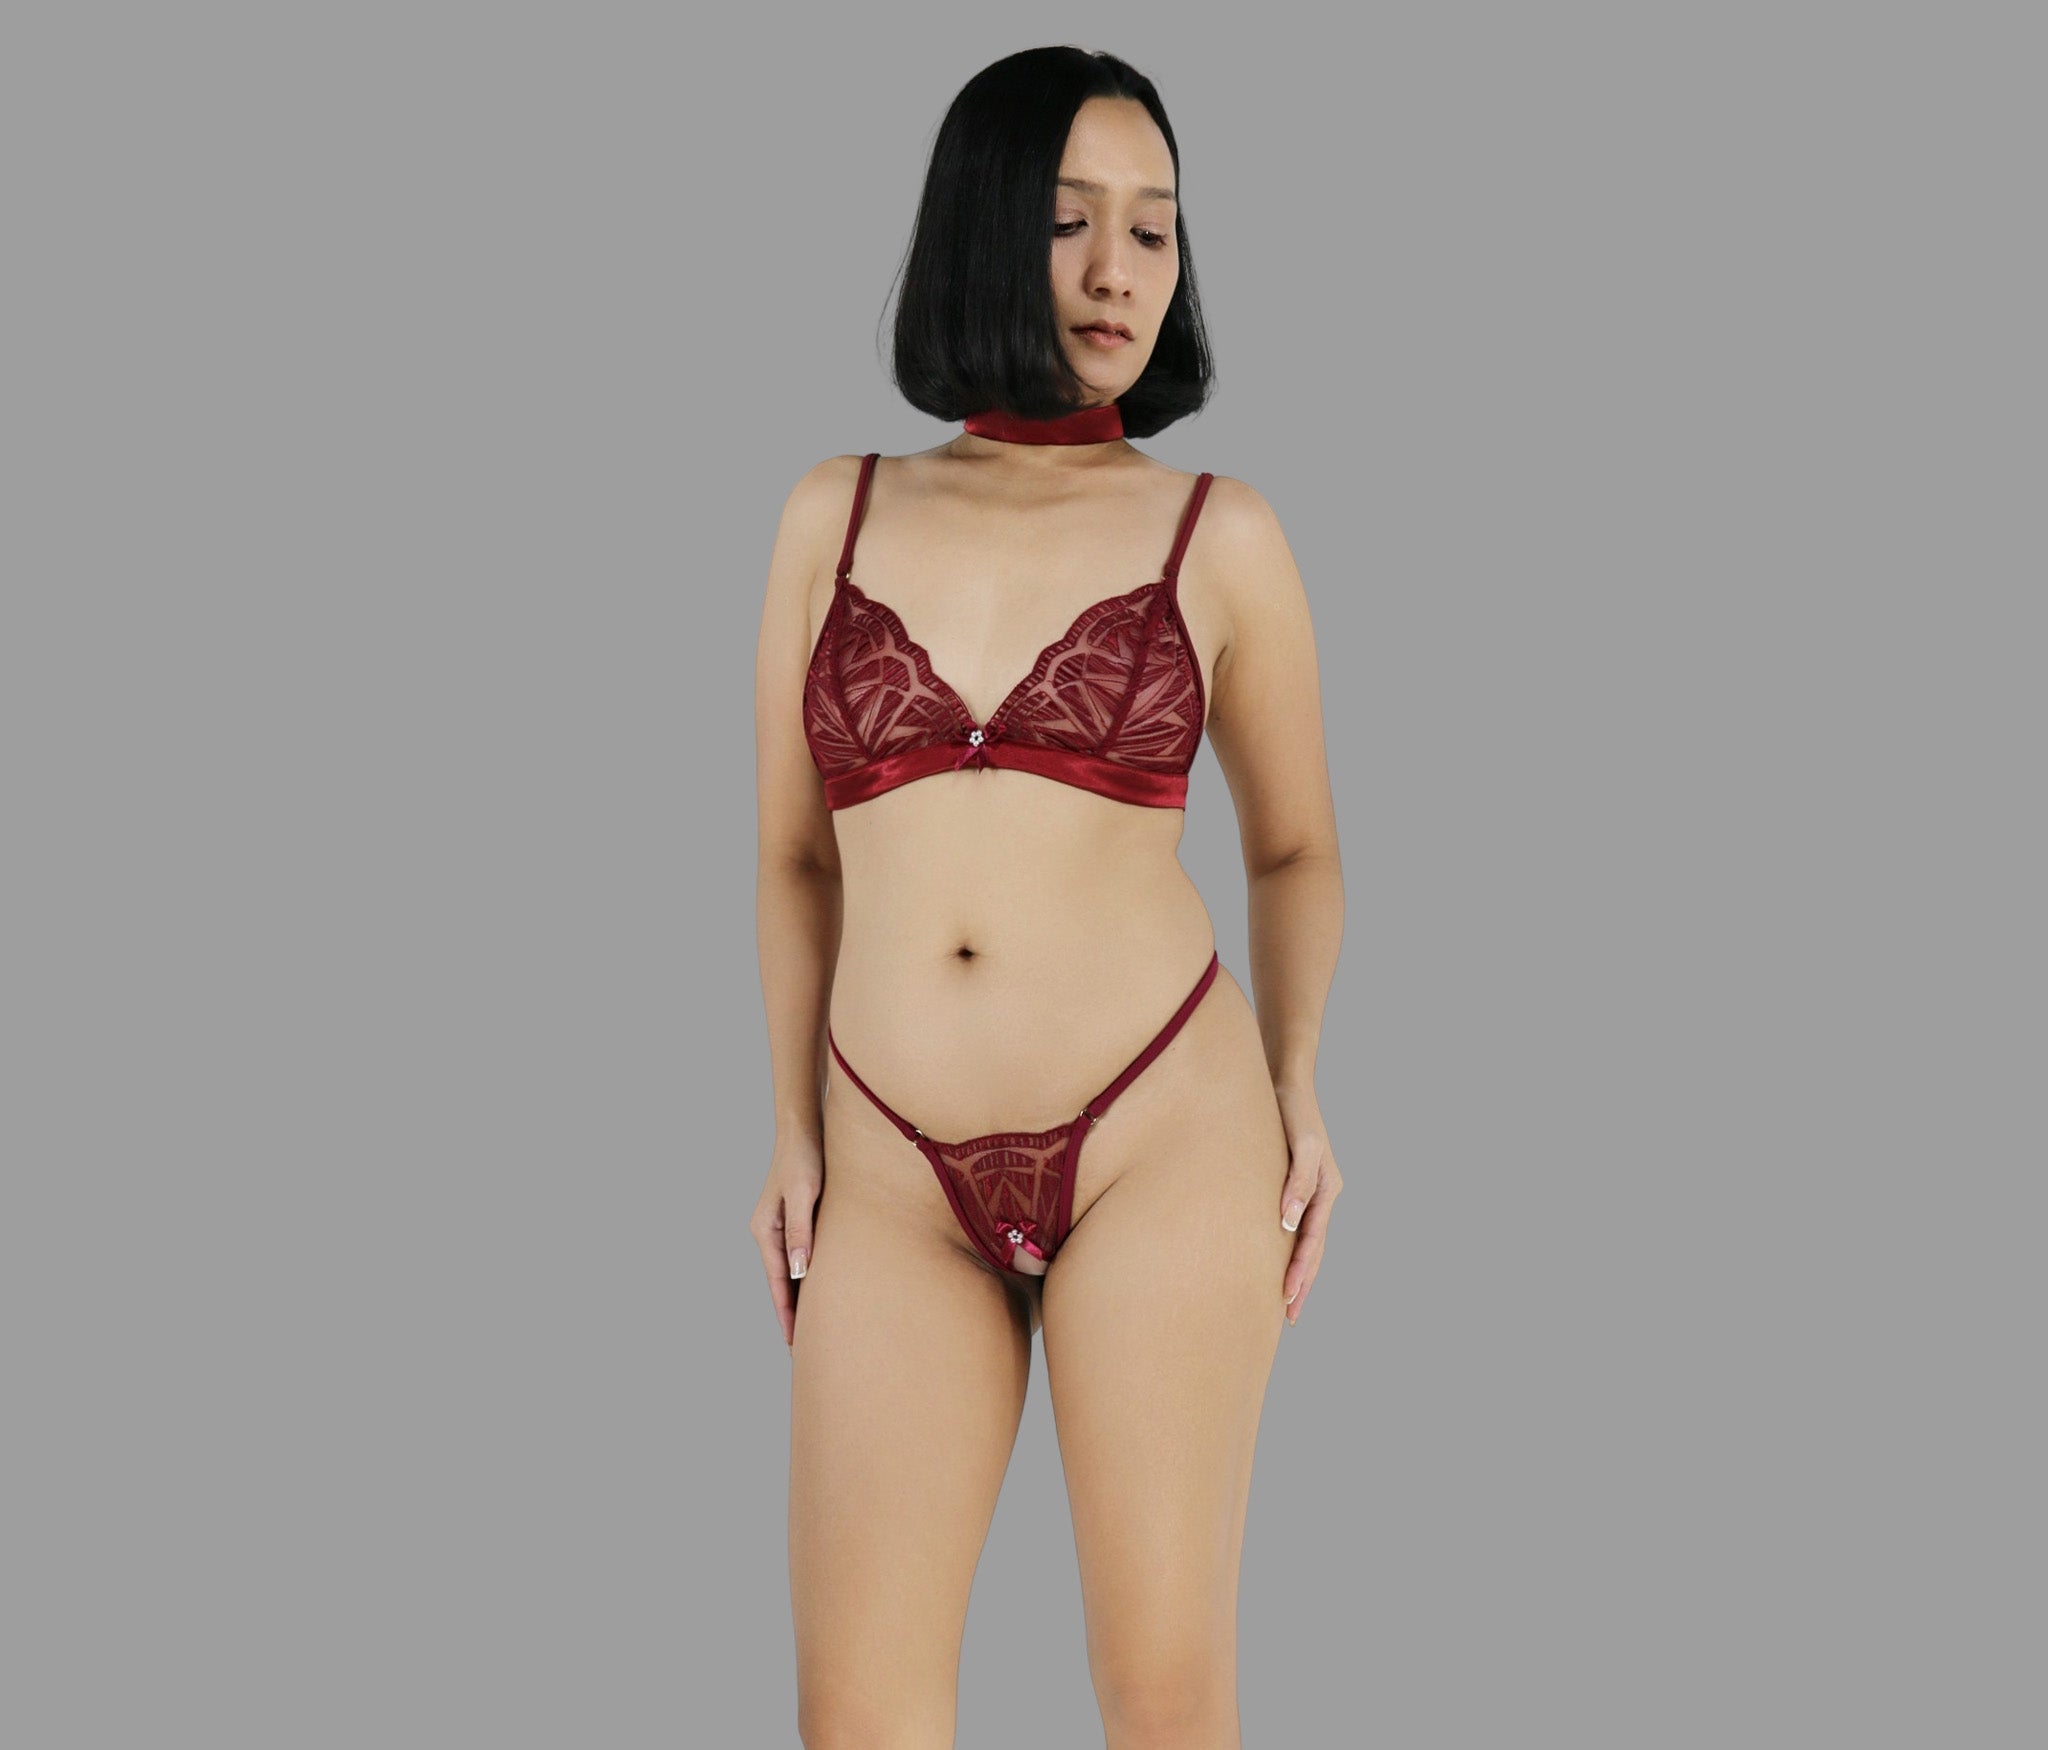 Sexy lingerie set with crotchless G string panties in see through burgundy red lace sexy sheer boudoir lingerie - Ange Déchu